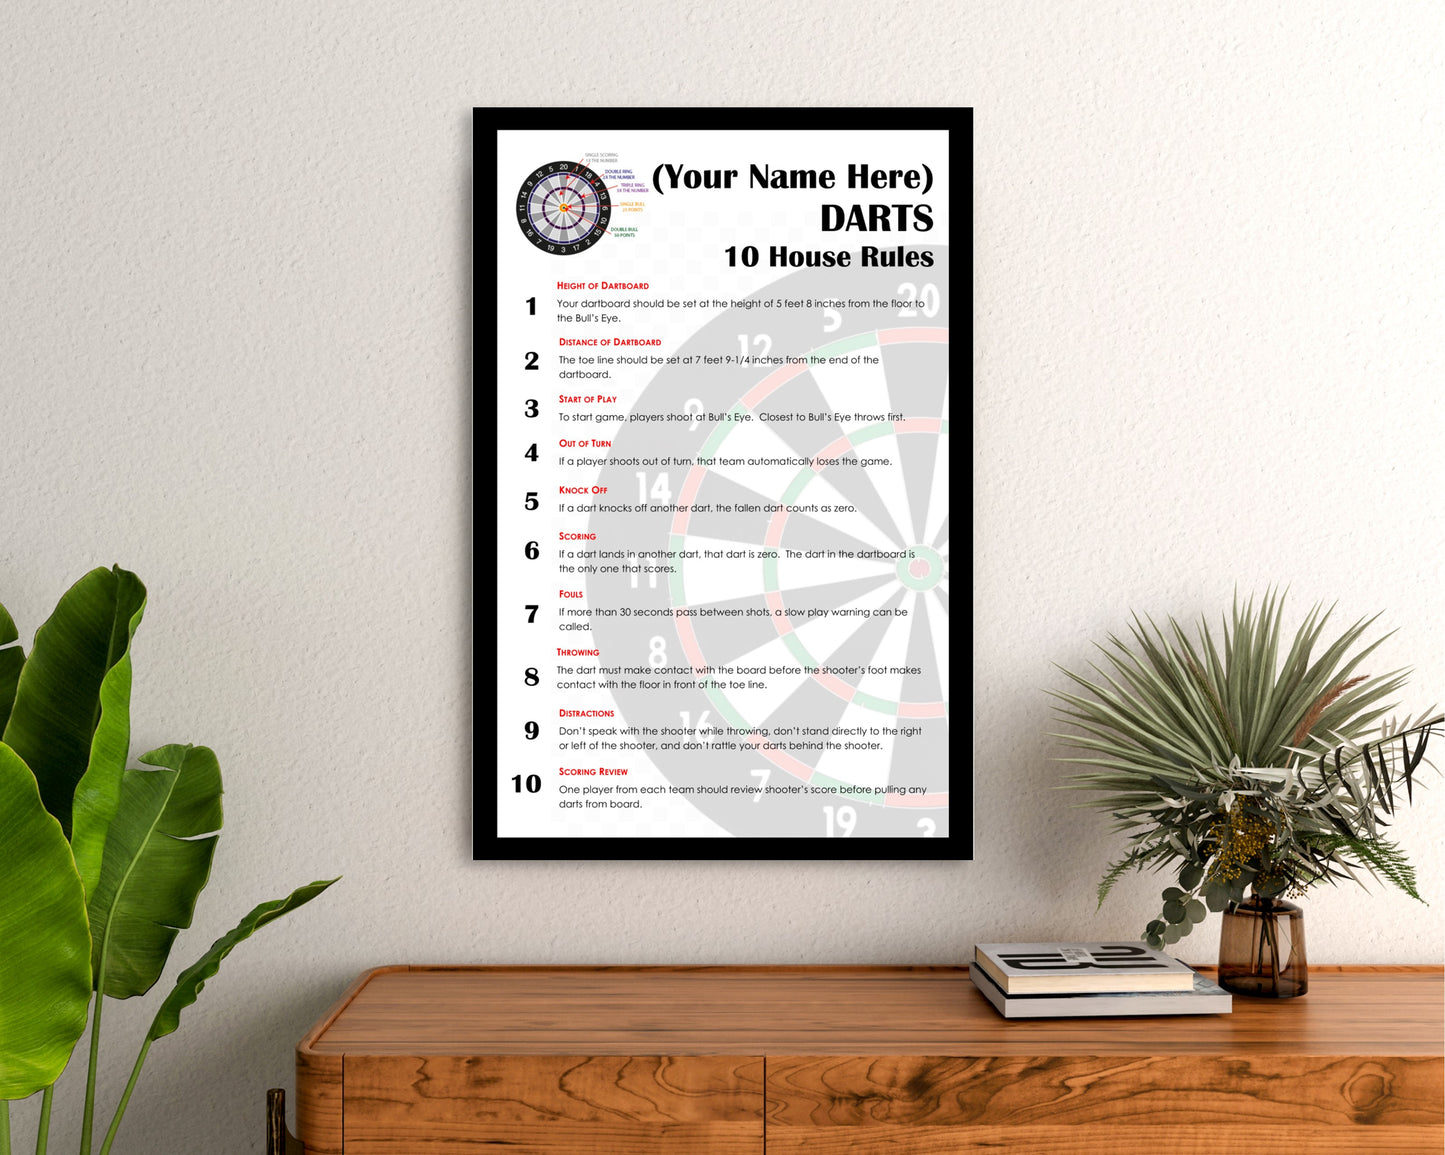 10 Simple House Dart Rules Personalized and Customized With Your Name